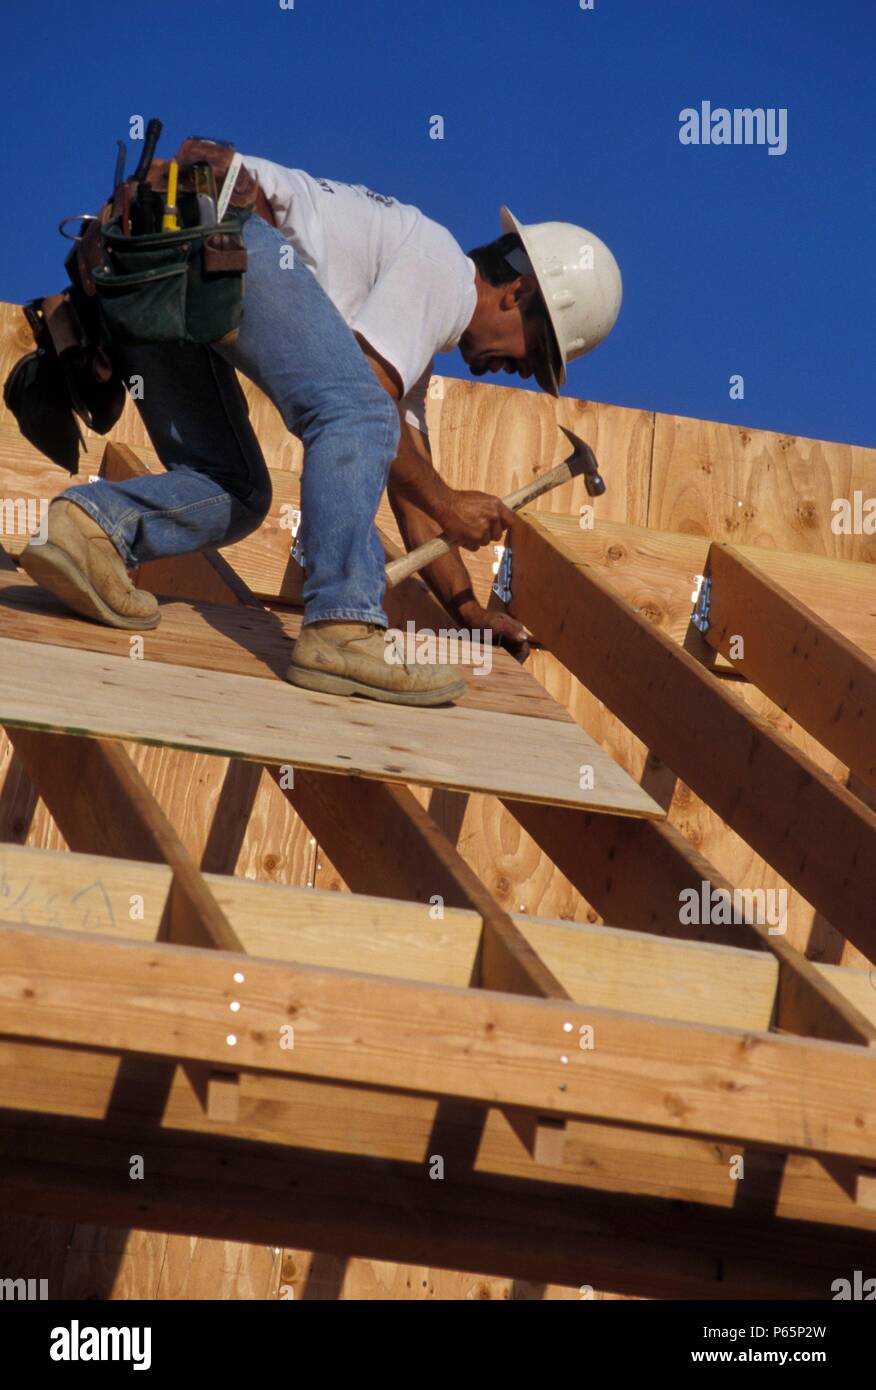 Carpenter nailing roof sheathing on rafters Stock Photo